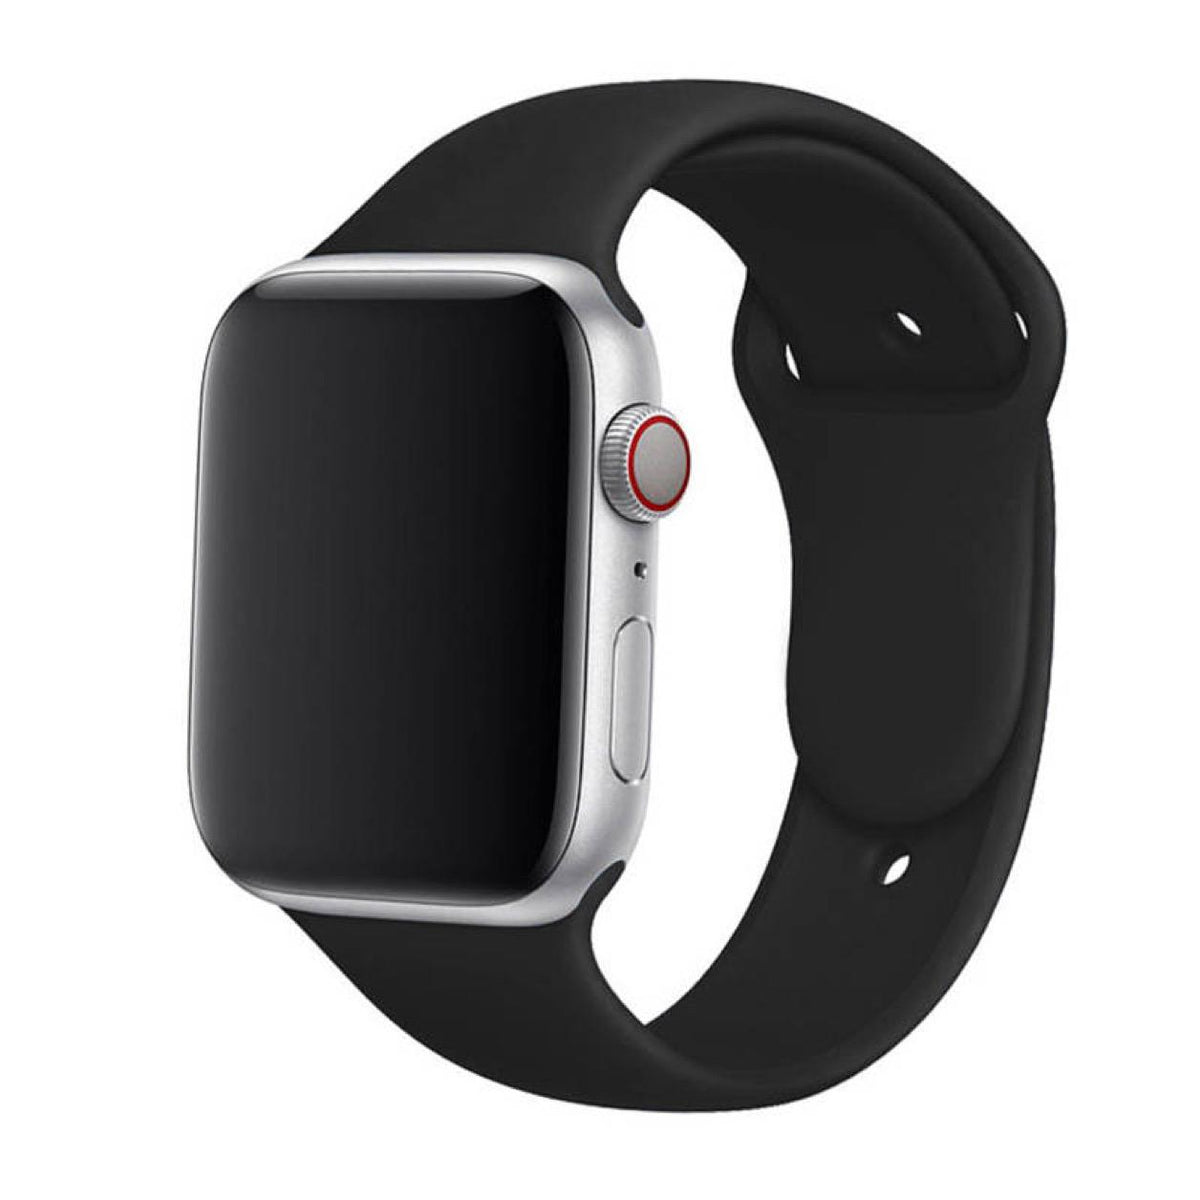 Black Apple Watch Strap - thefonecasecompany